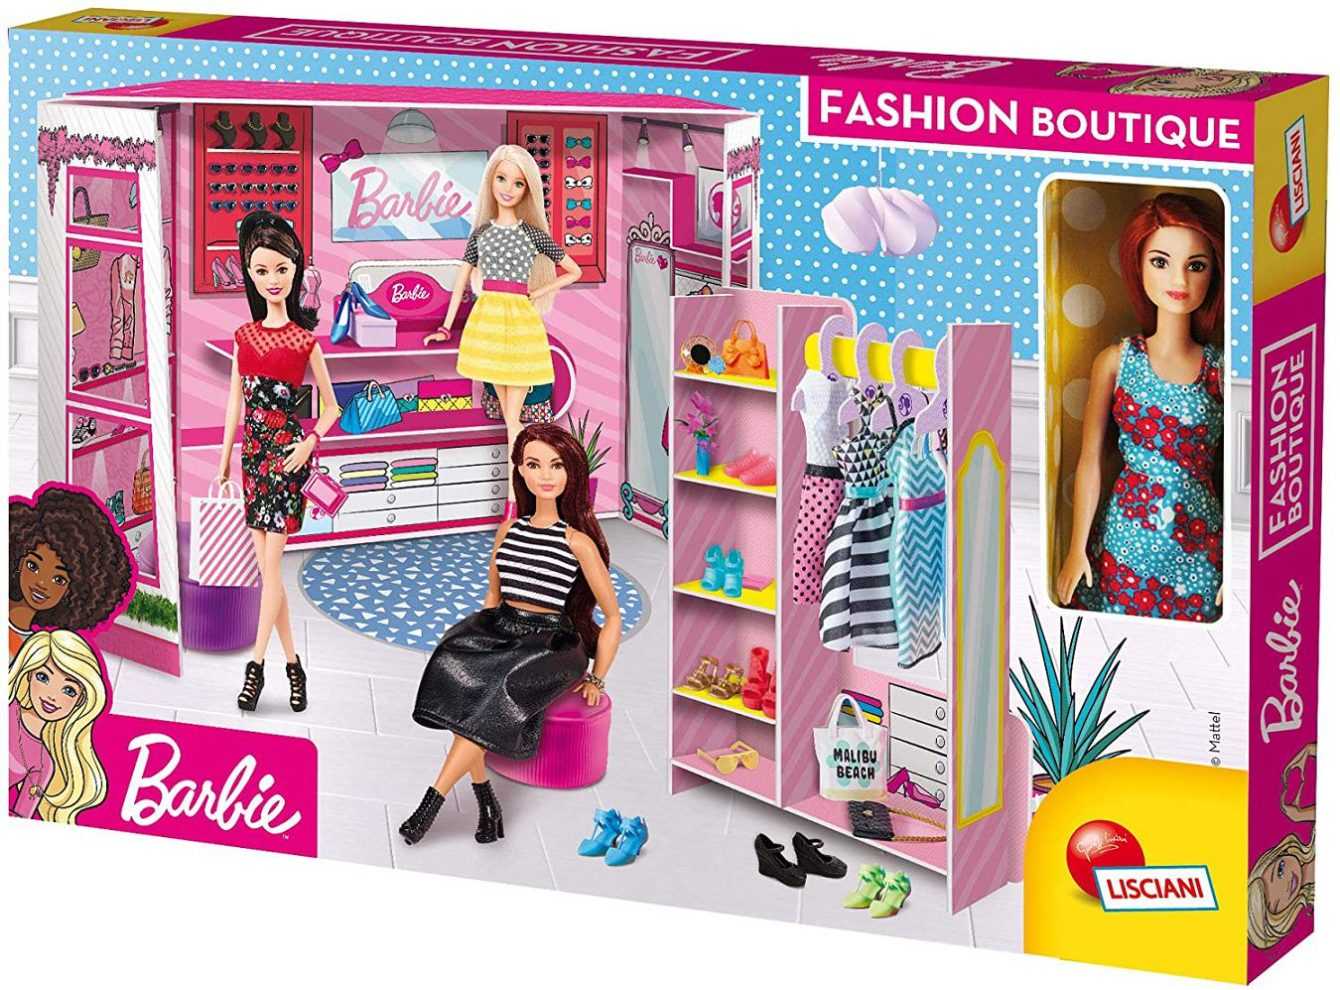 Mattel: here are the gift ideas for Christmas 2021!